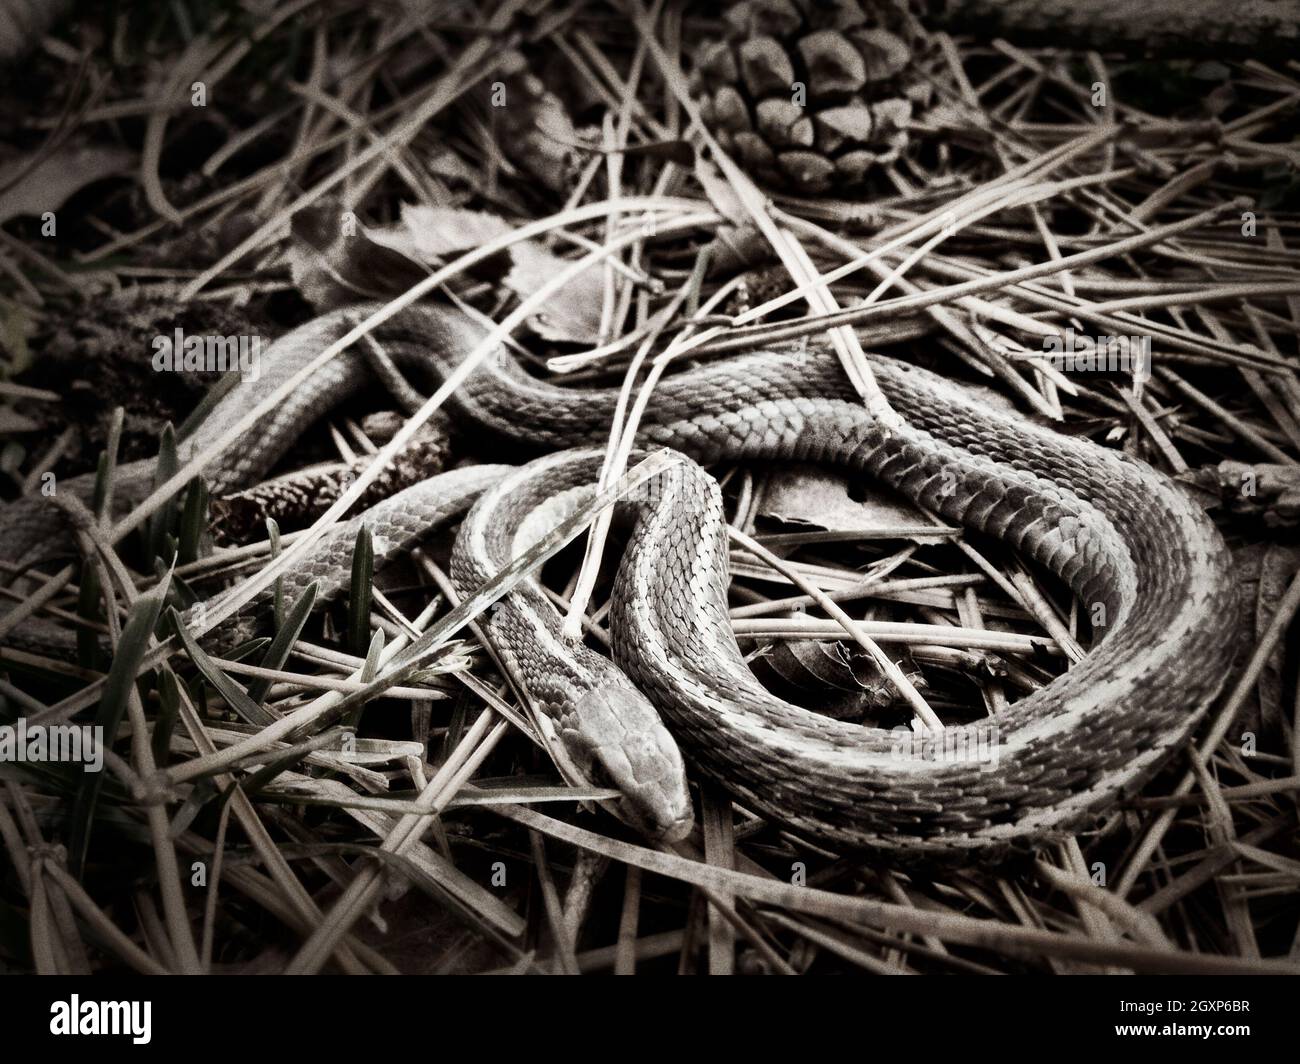 Black and white shot of a garter snake coiled in a nest of grass Stock Photo